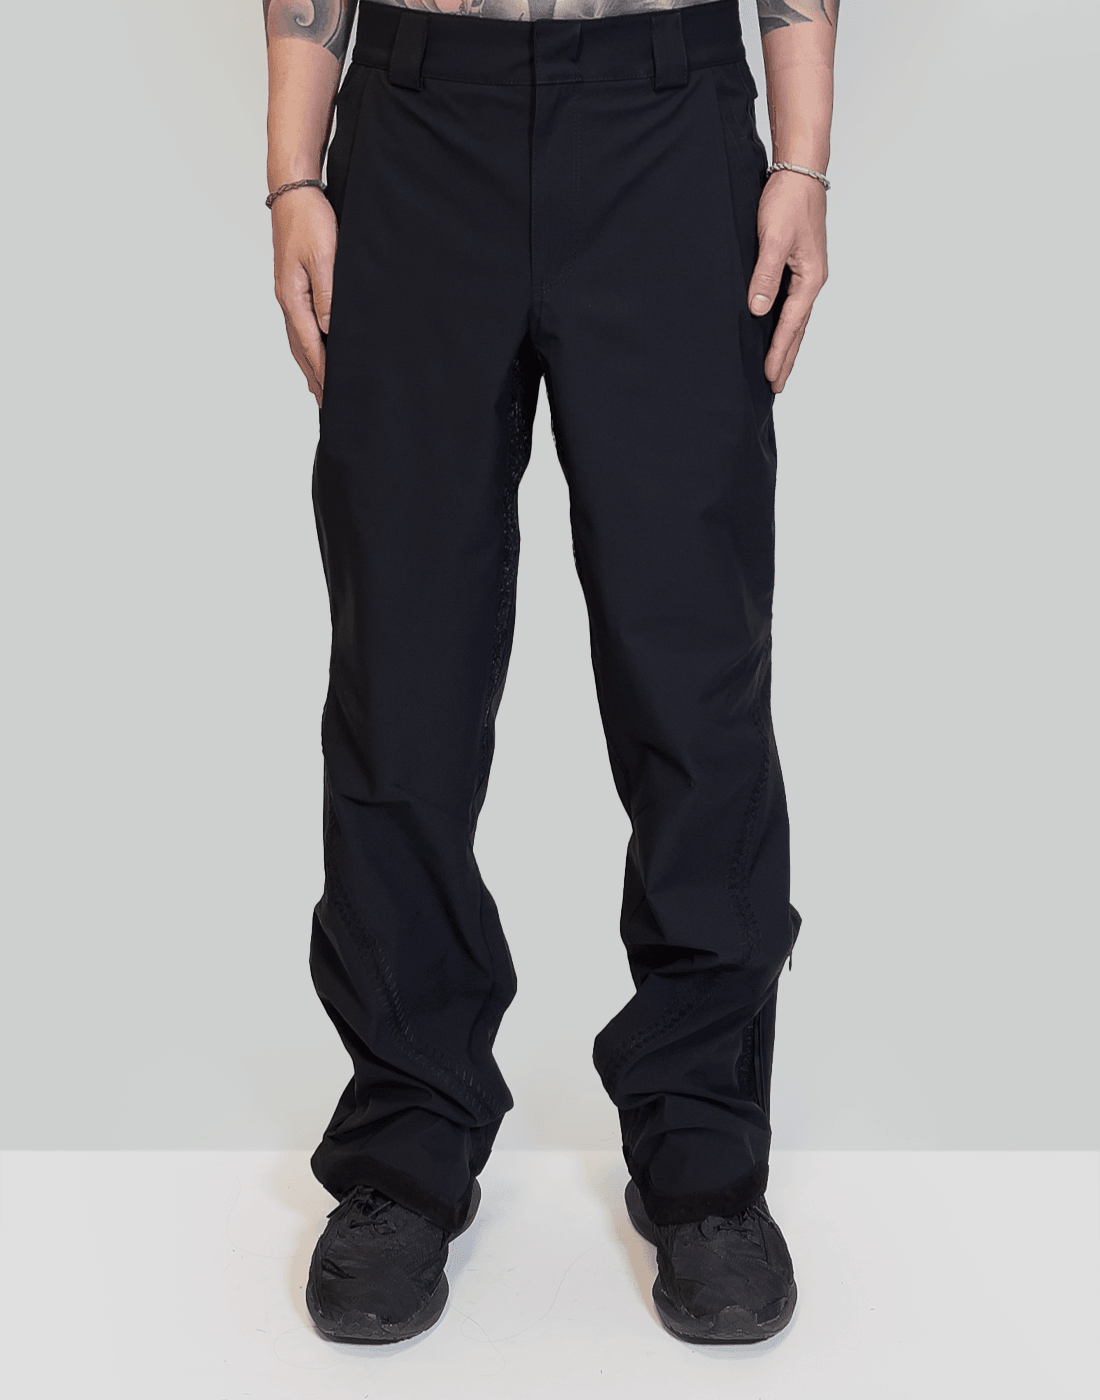 XLIM SYNOPSIS 3 Trousers black - その他